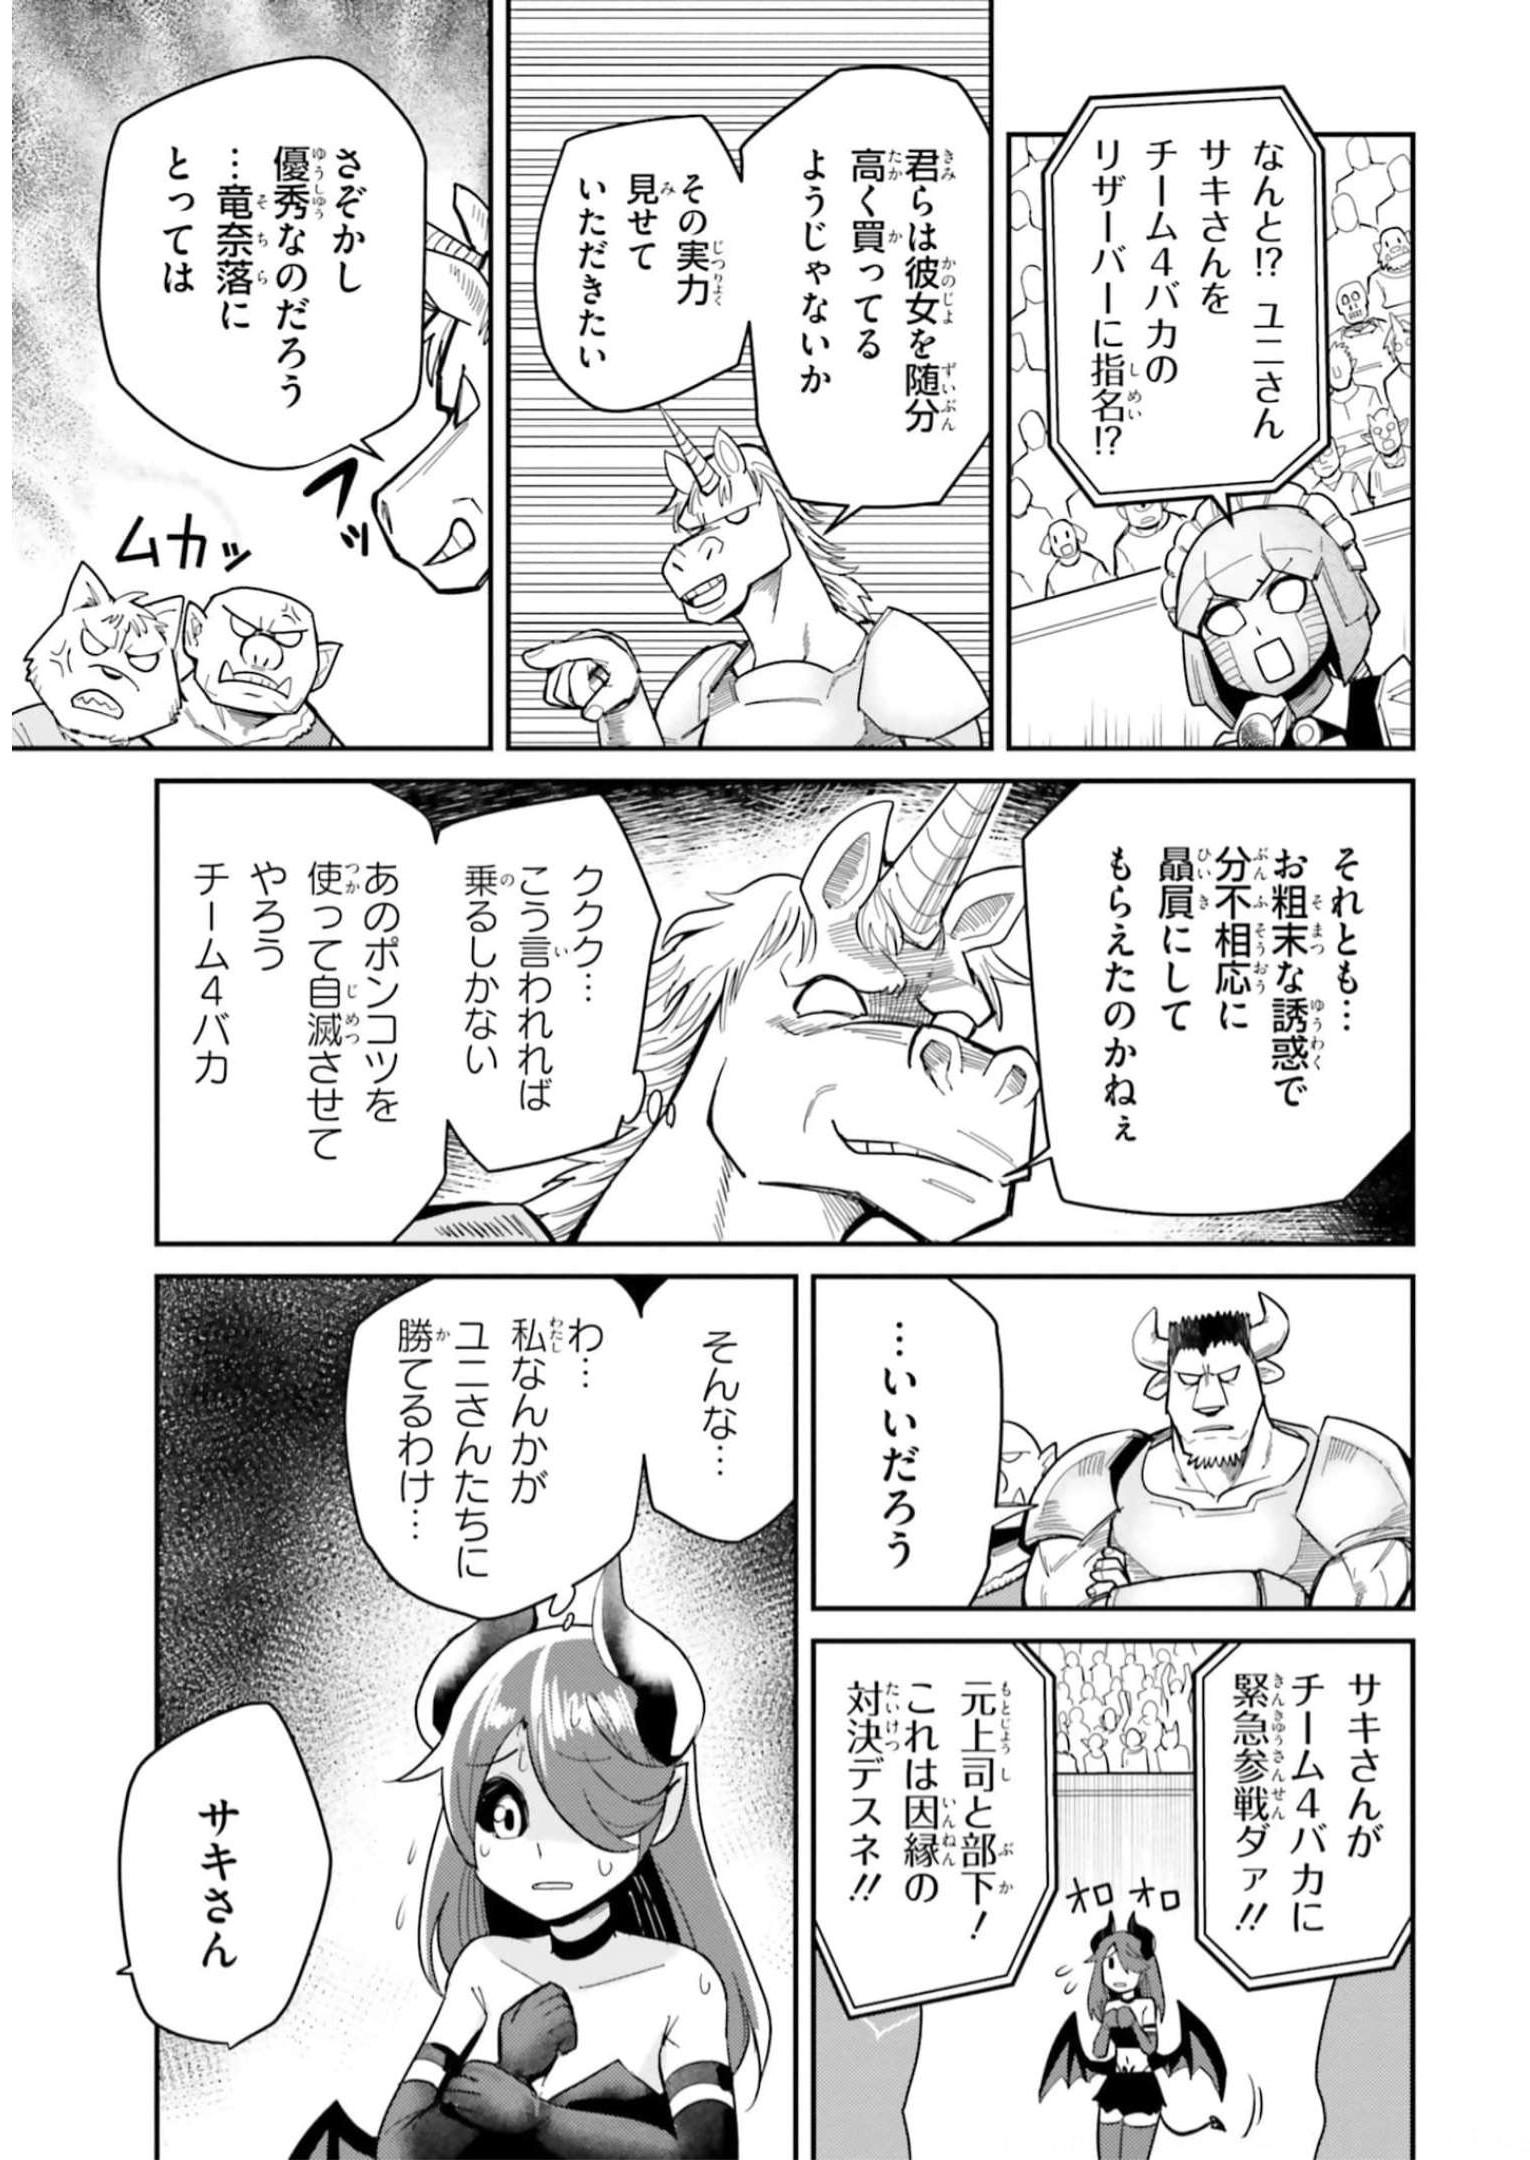 Dungeon Friends Forever Dungeon’s Childhood Friend ダンジョンの幼なじみ 第20話 - Page 5